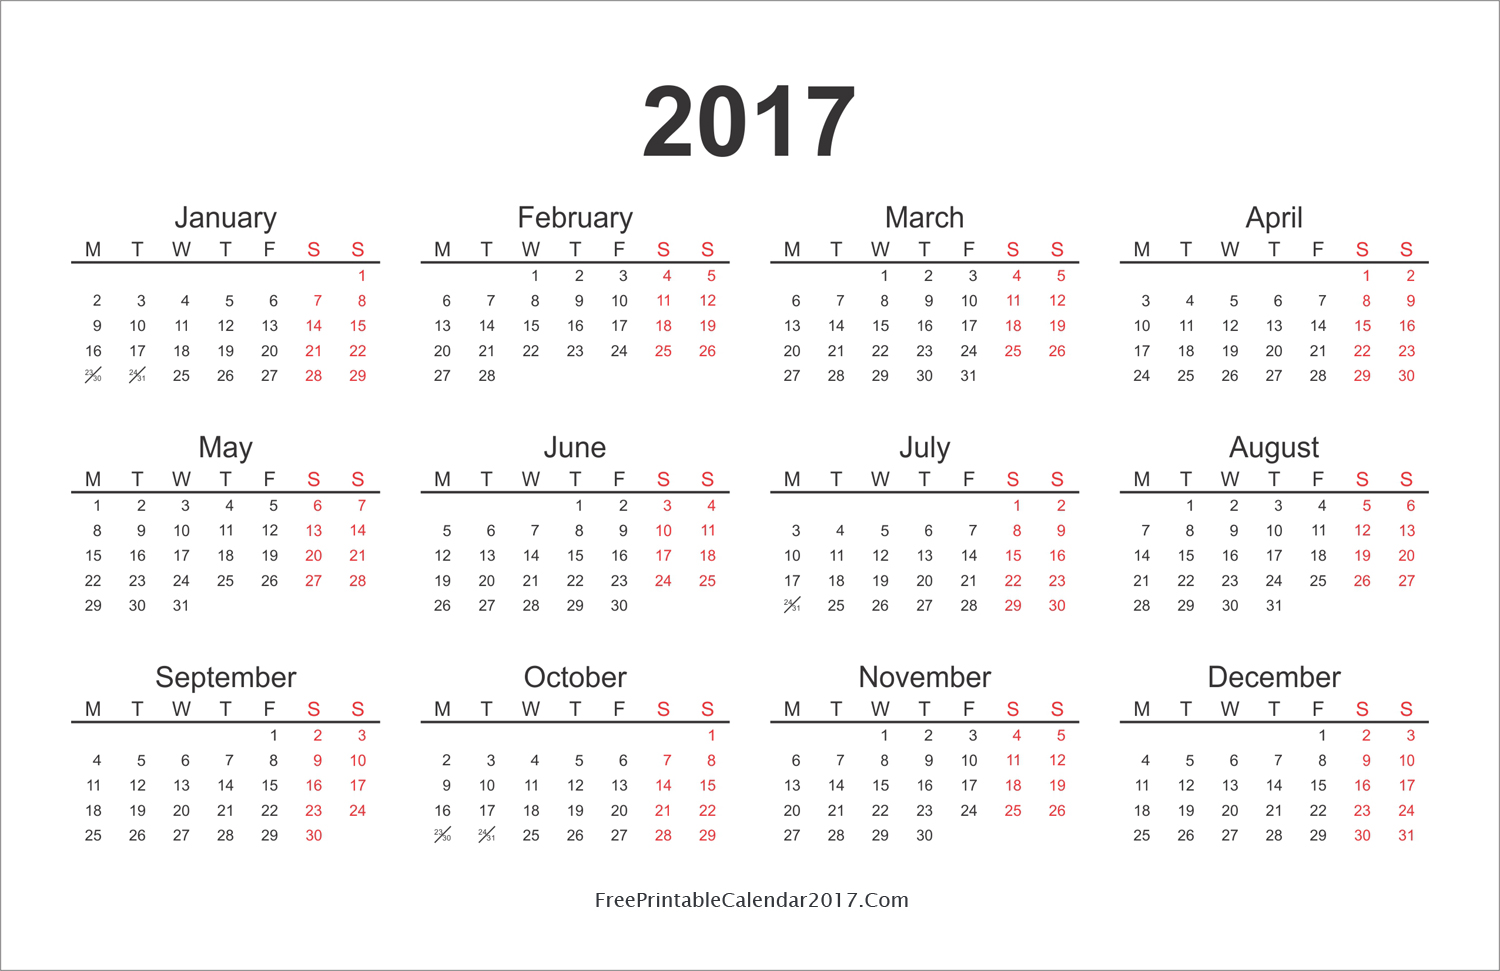 1000+ images about FREE printable 2017 + 2016 calendars on Pinterest